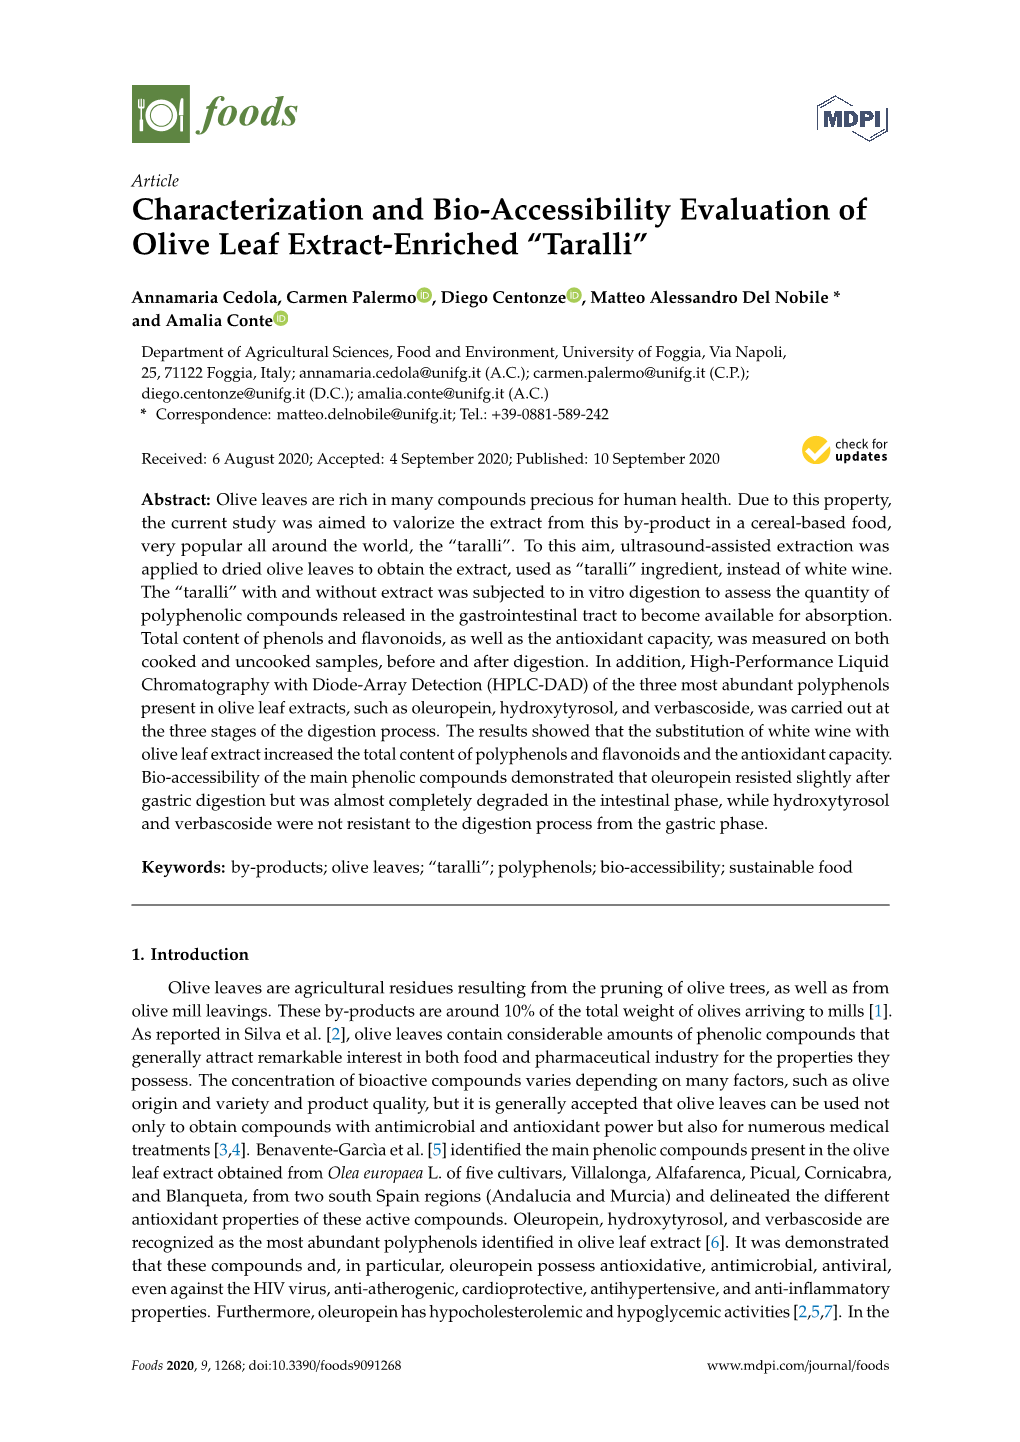 Characterization and Bio-Accessibility Evaluation of Olive Leaf Extract-Enriched “Taralli”